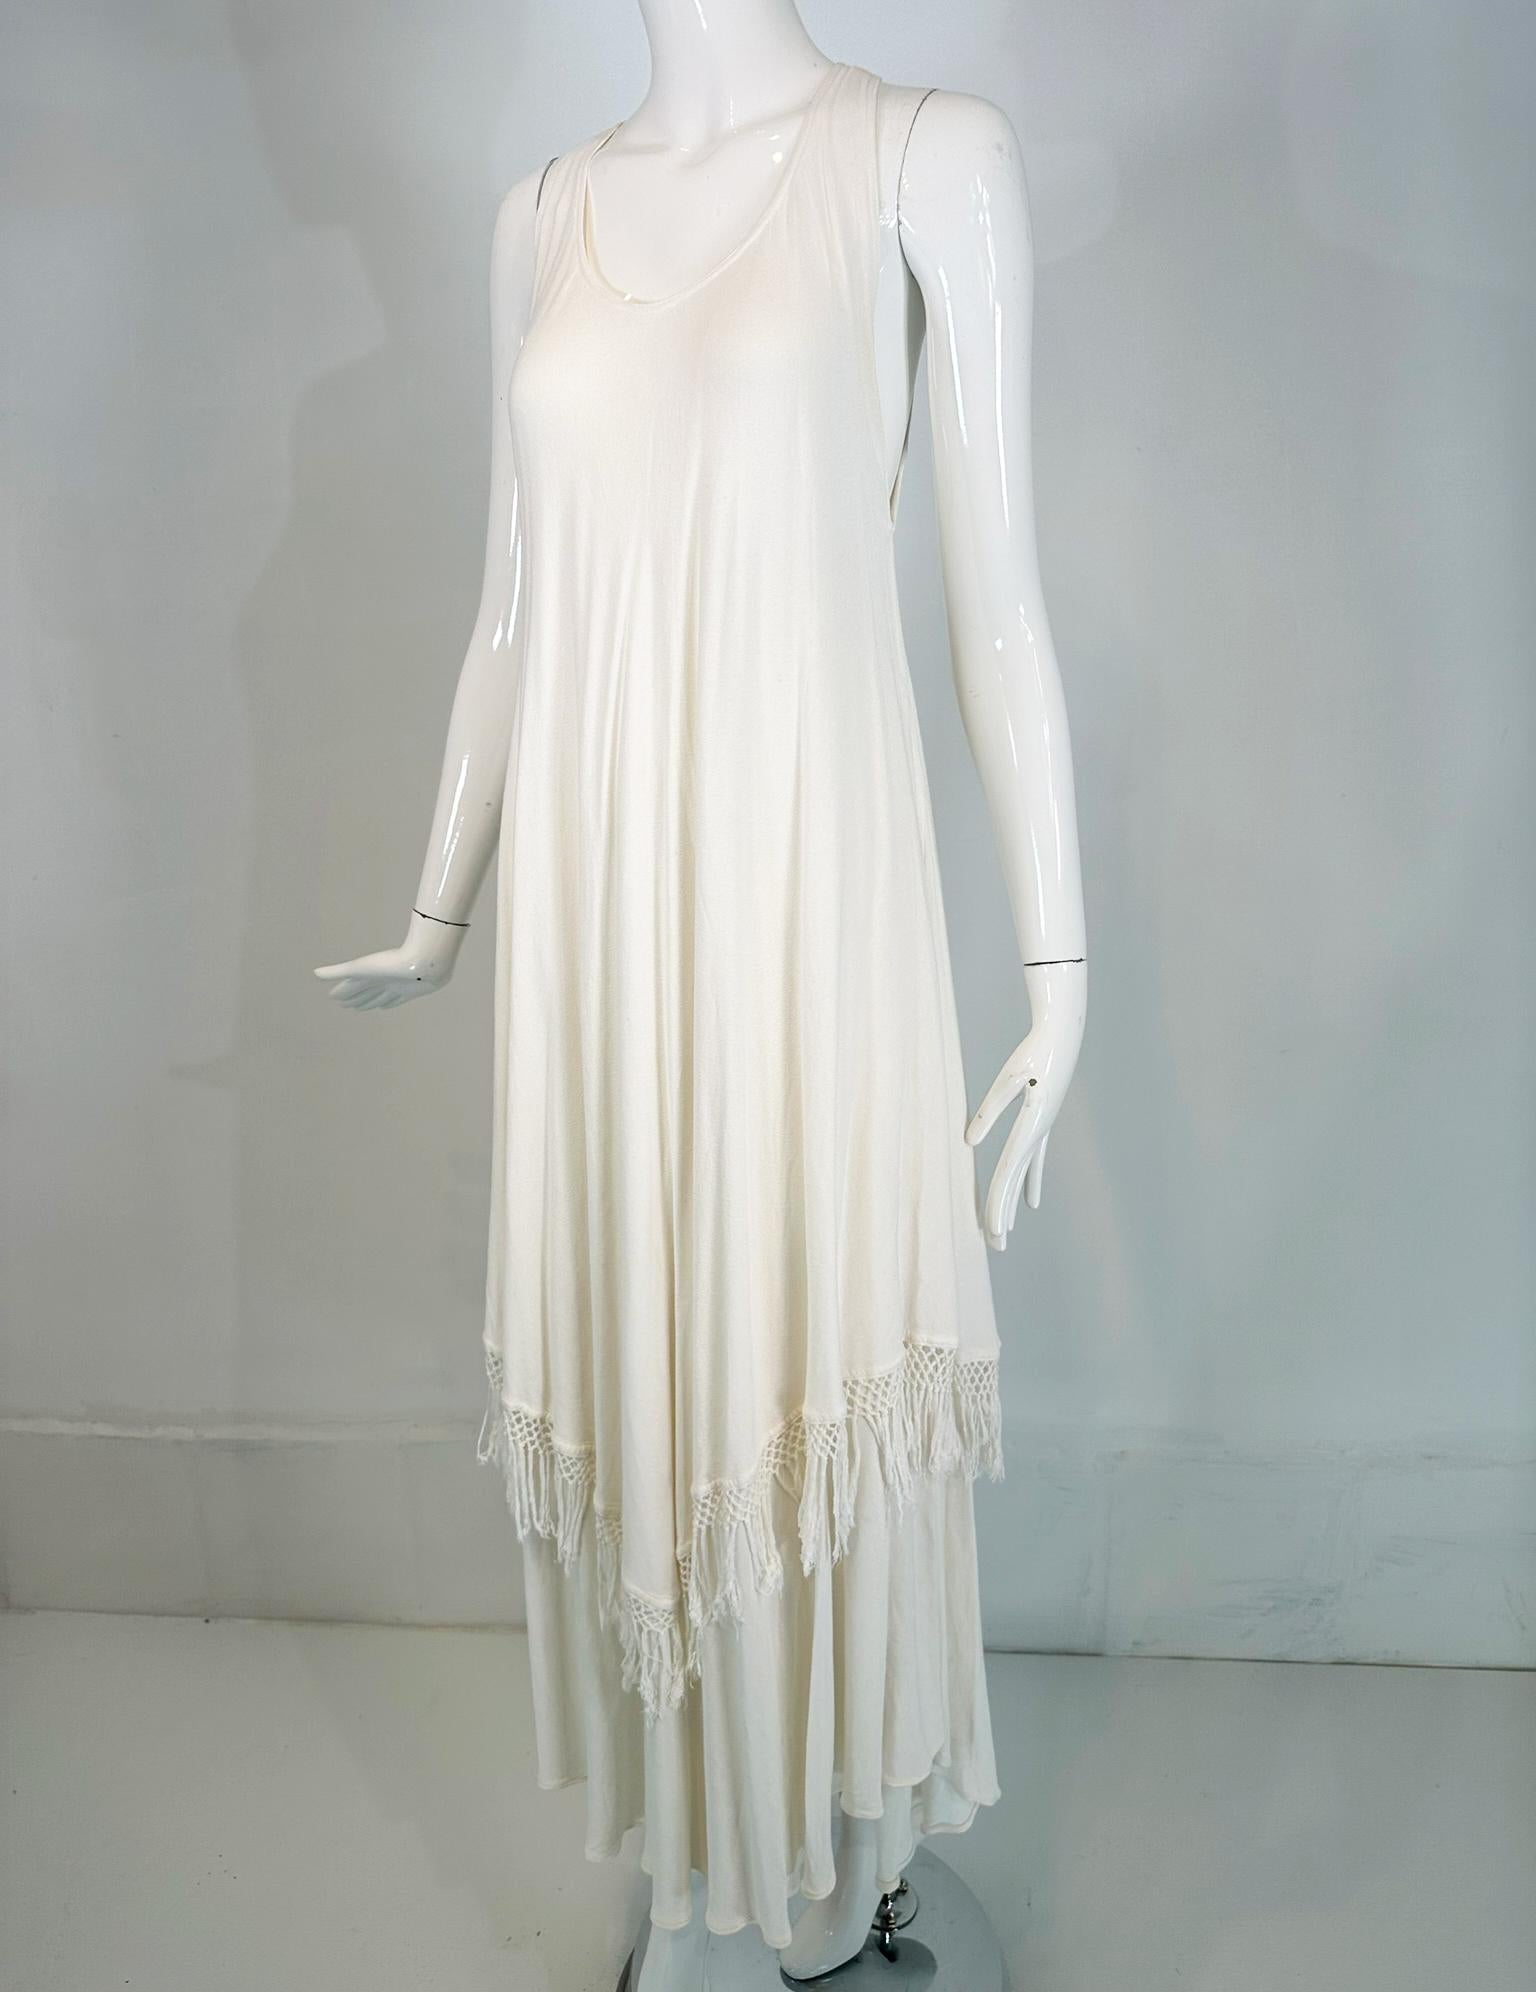 Laise Adzer off white racer shoulder maxi layered fringe hem sleeveless dress from the 1990s. Soft rayon 80% cotton 20% blend off white summer dress Laise Adzer Morocco. Cut in shoulder front & back, the bias cut dress is fitted through the bust and